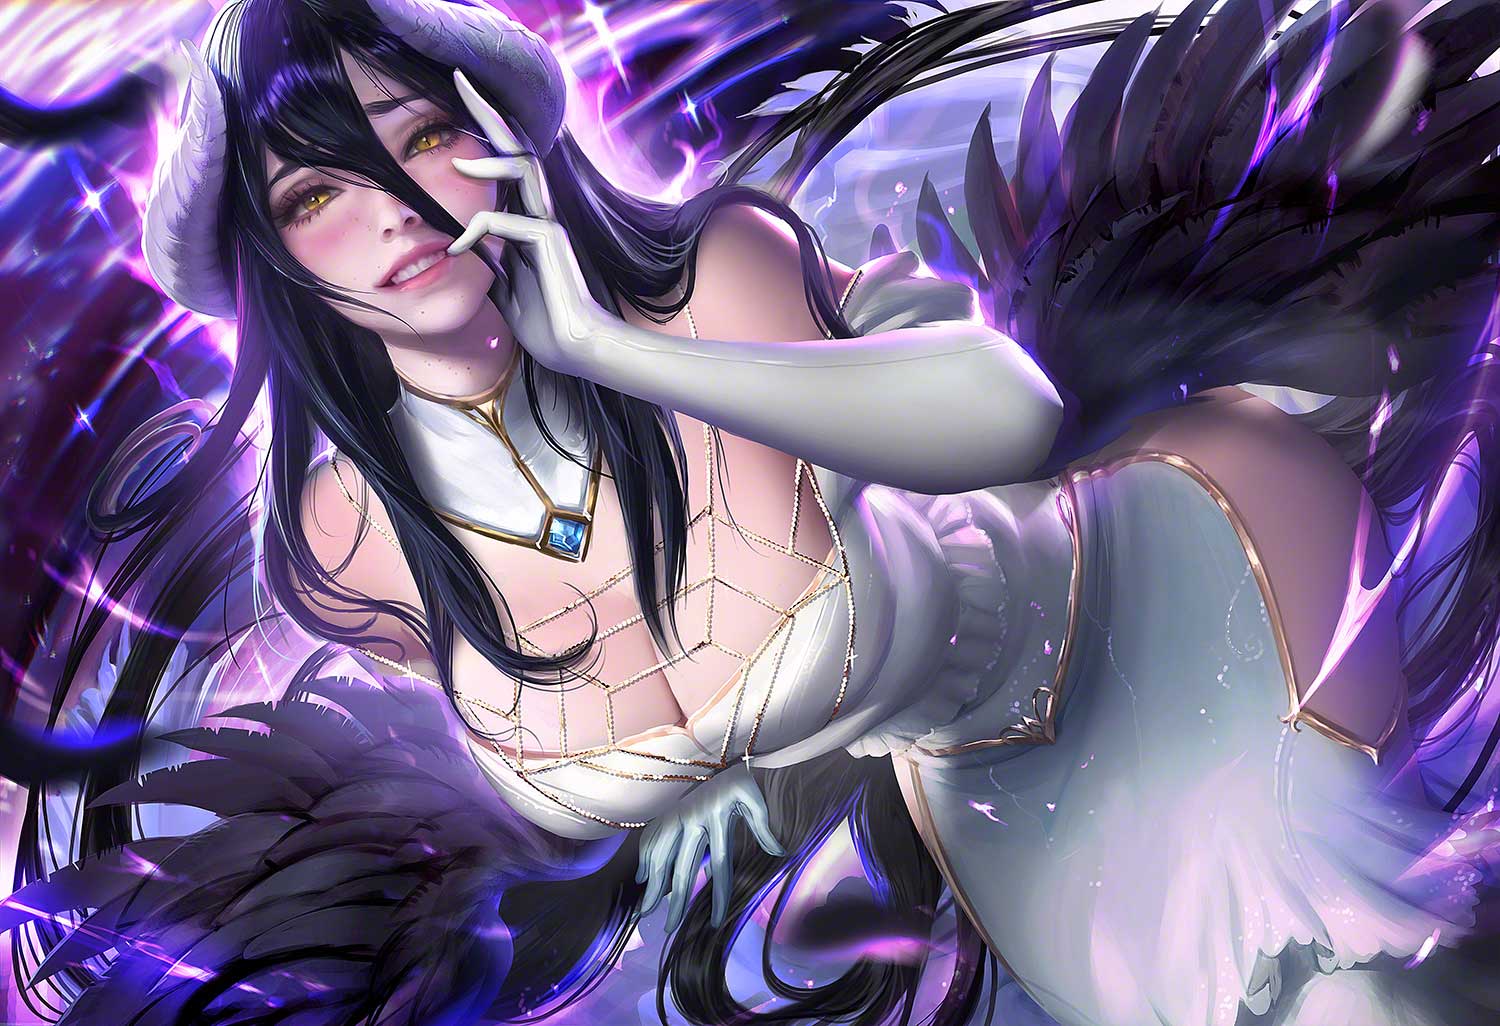 Overlord Albedo Wallpaper Engine Free. Download Wallpaper Engine